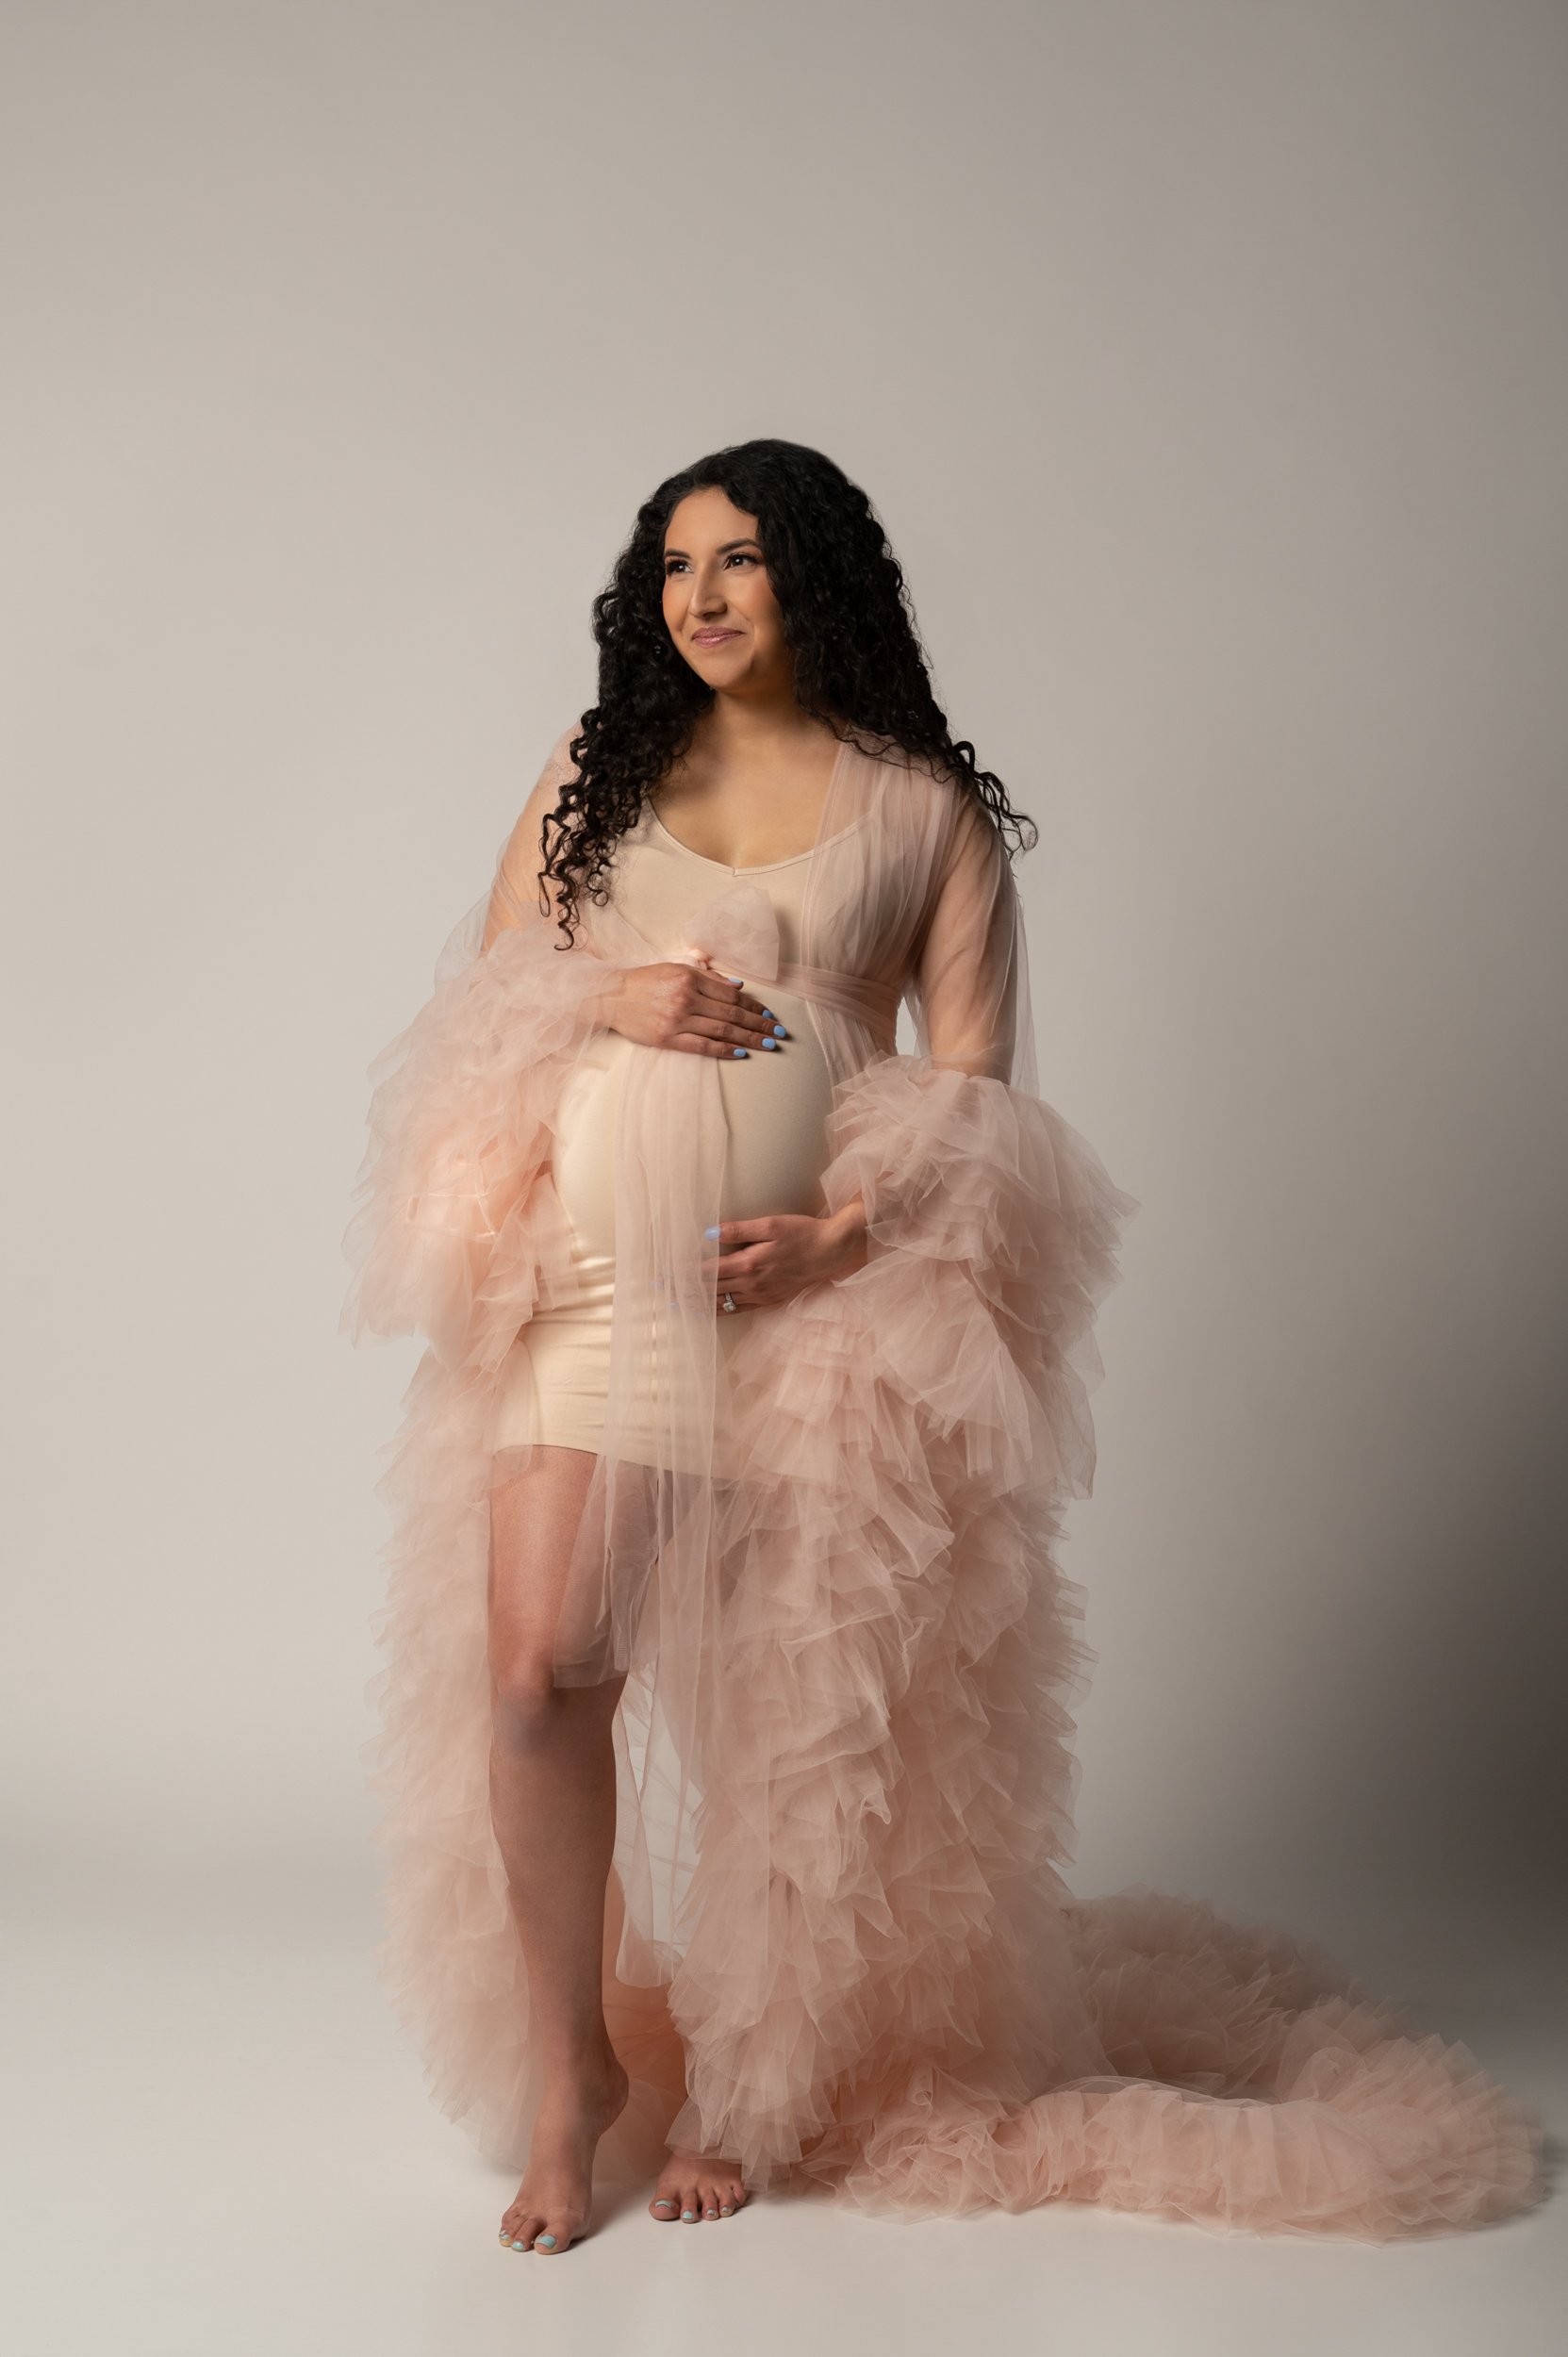 Top 5 Maternity Photoshoot Outfit Ideas For 2023 — Lauren Scott